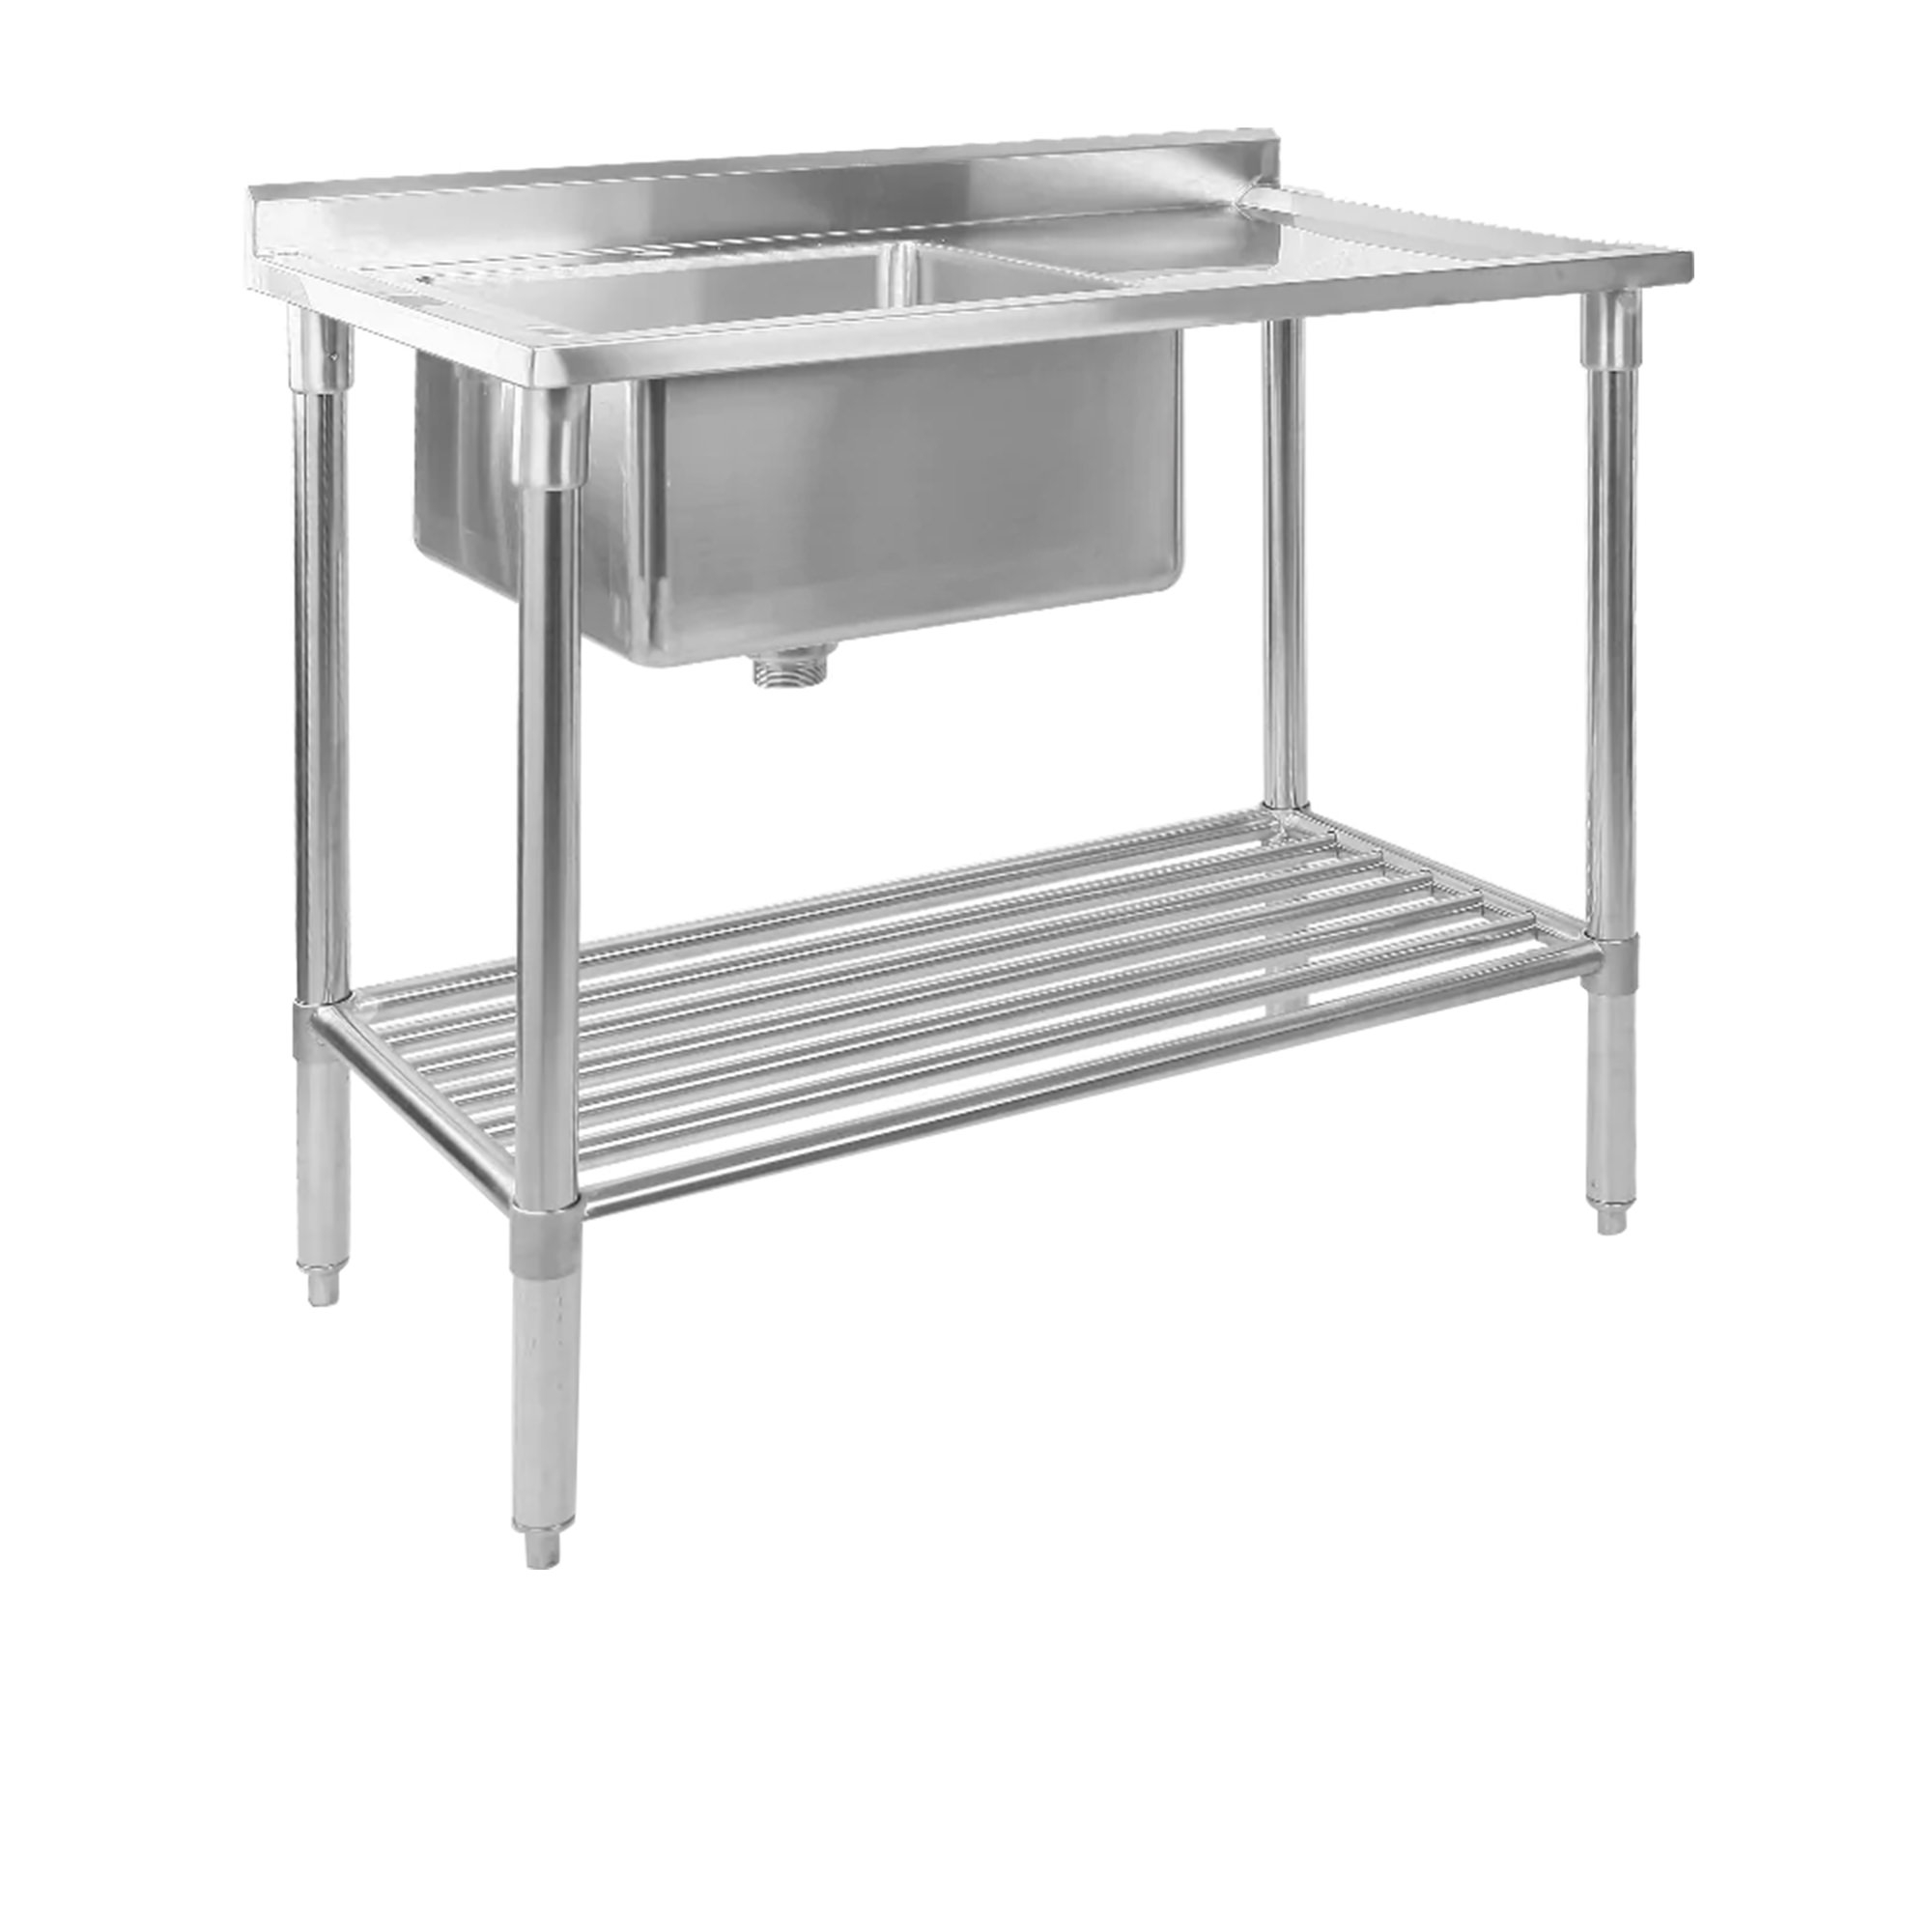 Cefito 304 Stainless Steel Kitchen Bench with Sink 100x60cm Image 1